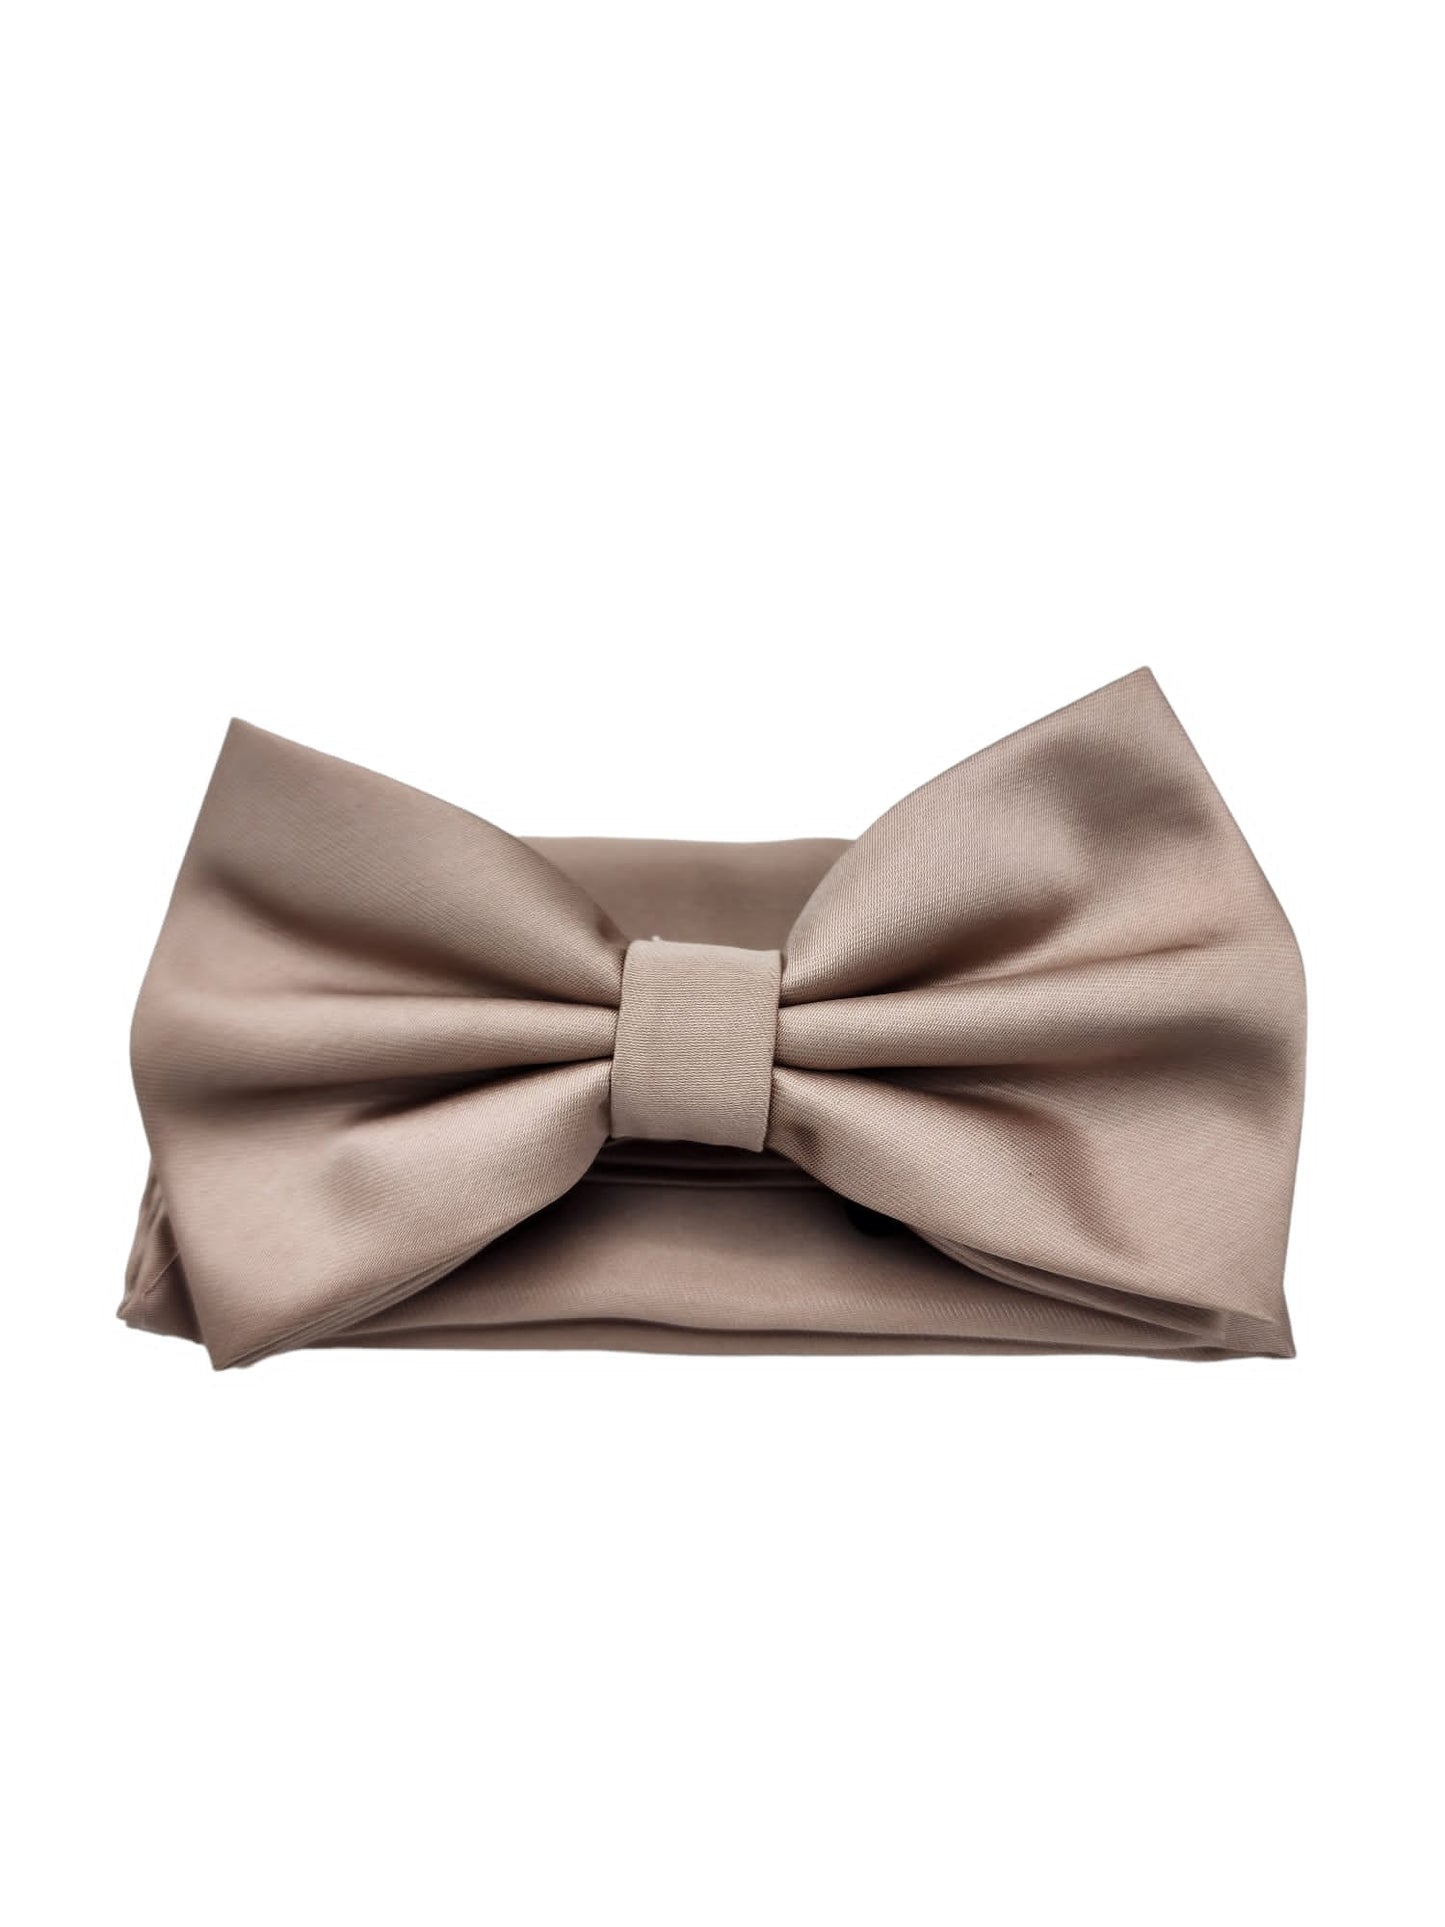 Giovanni Testi Classic Taupe Bow Tie with Hanky BT100-LLL